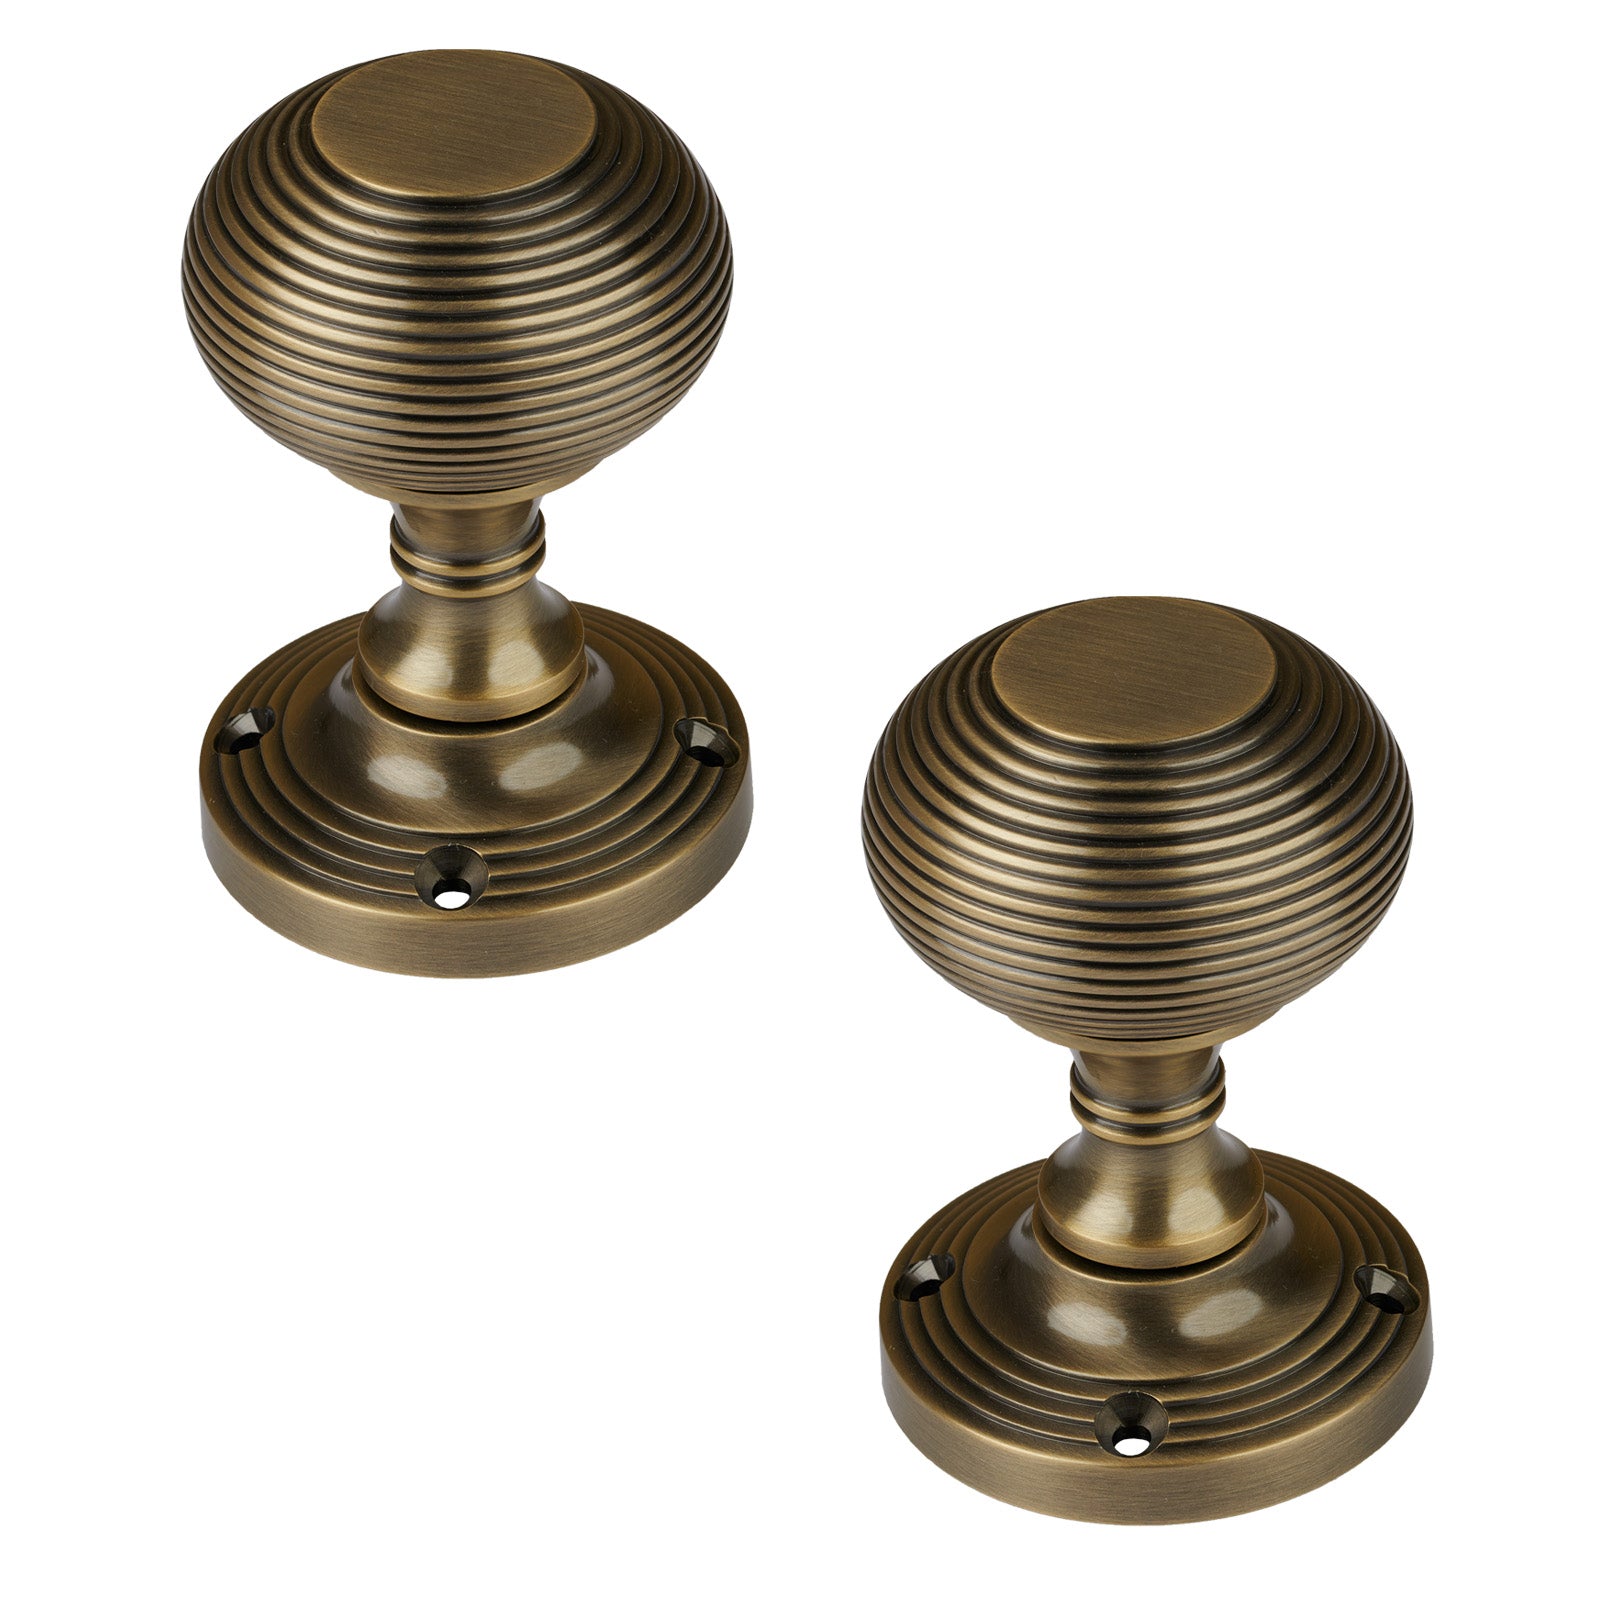 Reeded Door Knob on Rose in Aged Brass finish